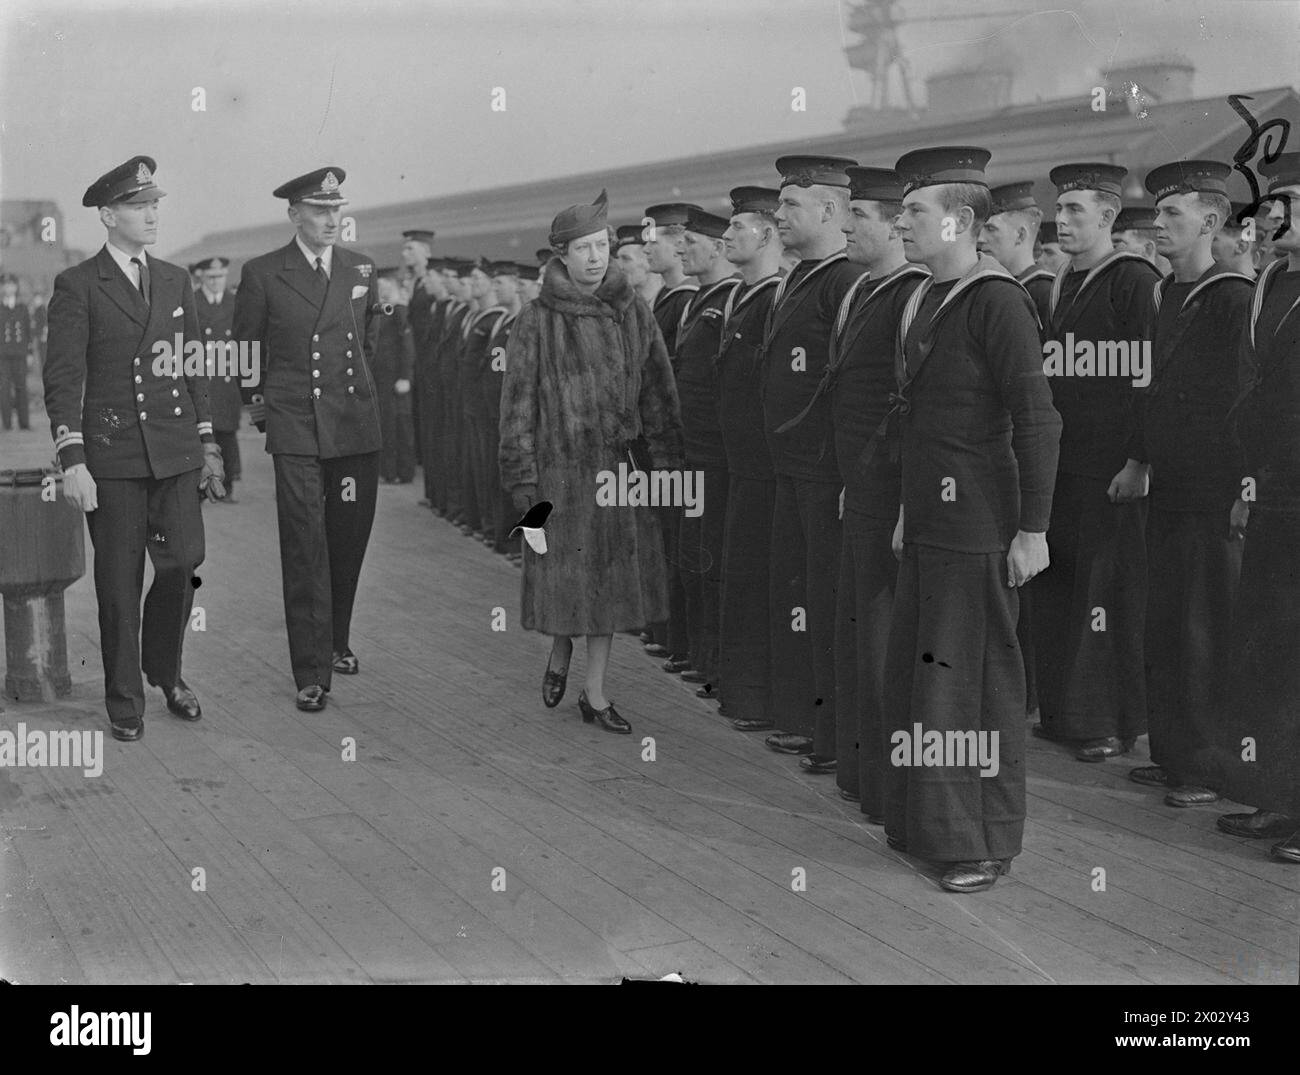 HRH THE PRINCESS ROYAL VISITS ROSYTH AND INSPECTS HMS PRINCE OF WALES. 1941. - The Princess Royal inspecting the ship's company of HMS PRINCE OF WALES during her visit to Rosyth Stock Photo